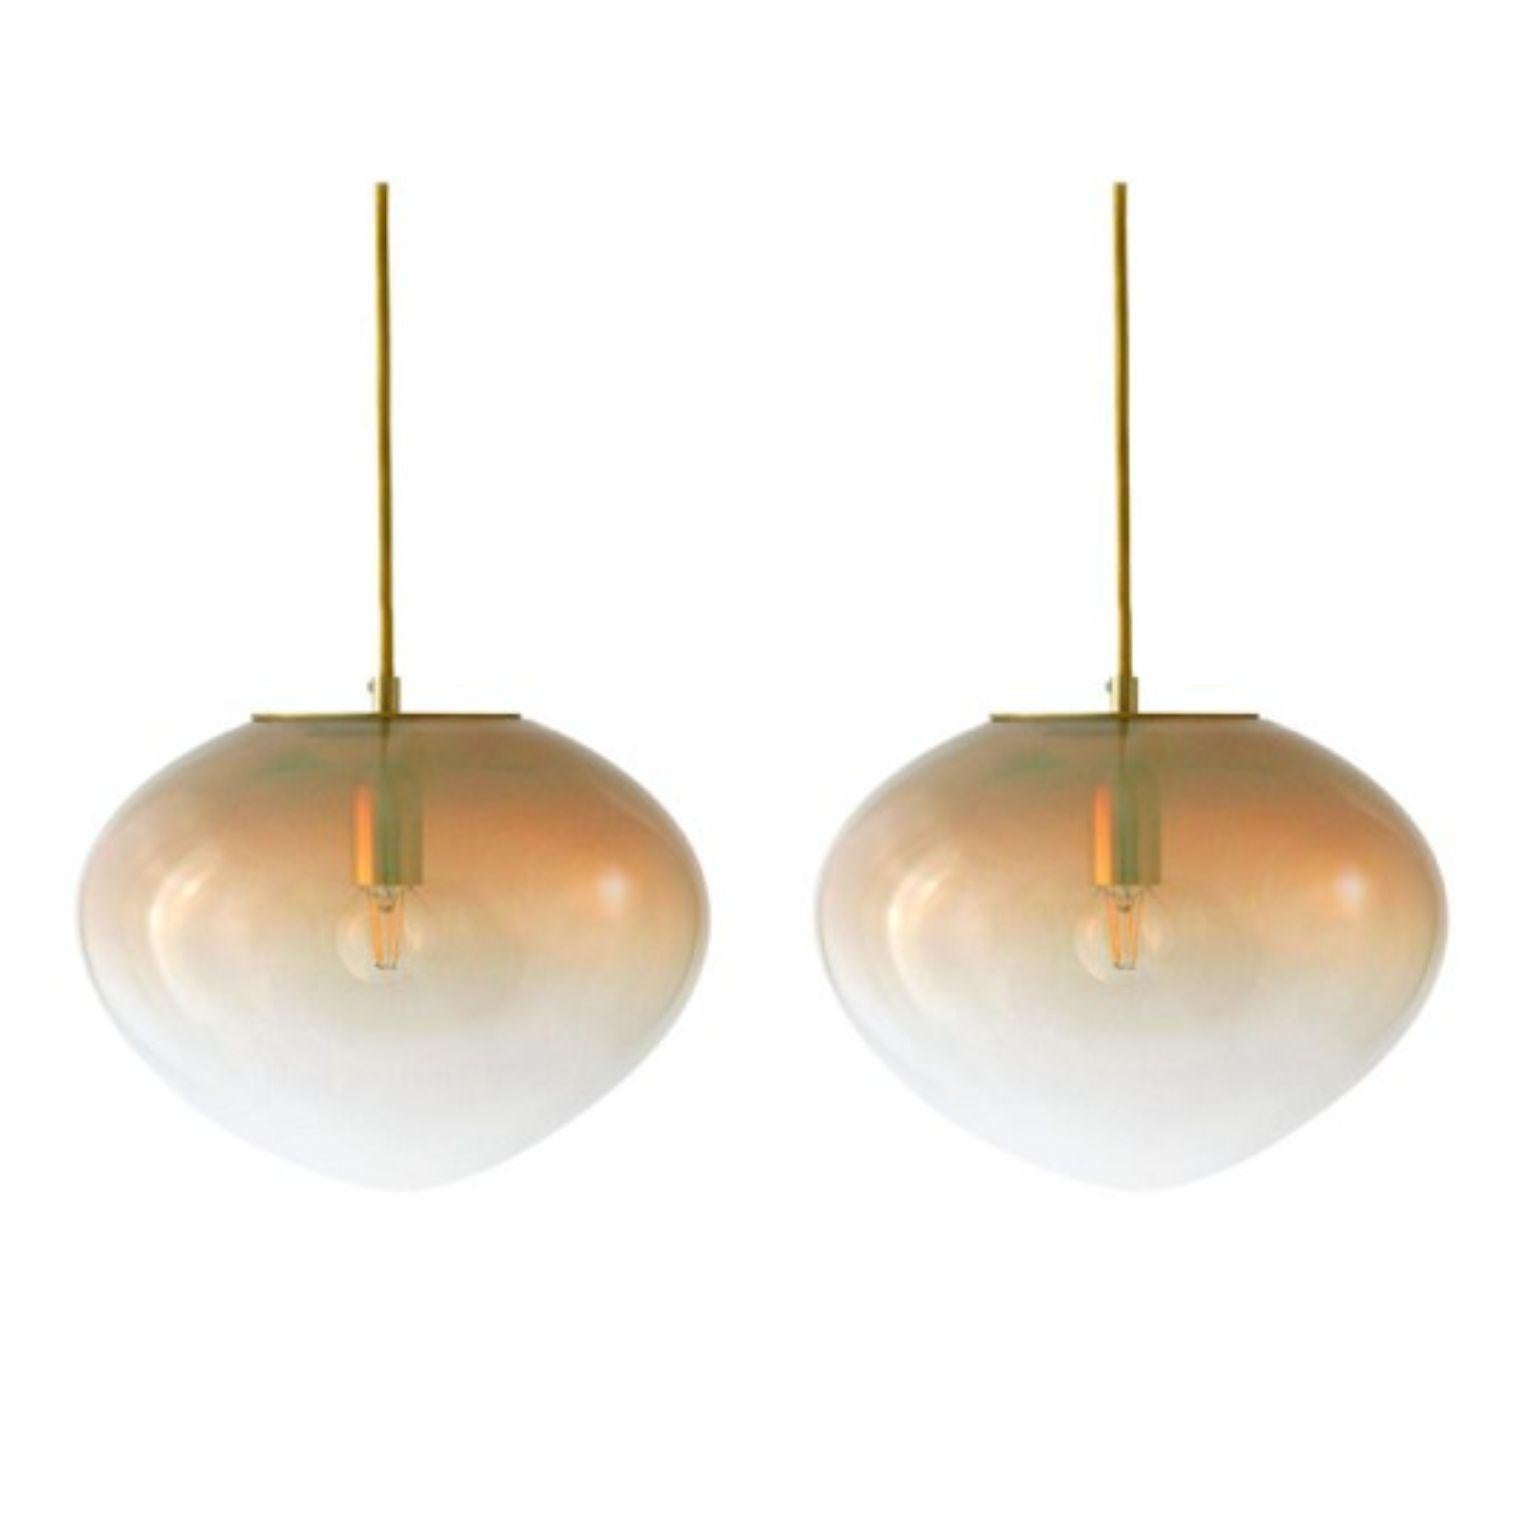 Set of 2 Sirius M pendants by ELOA.
No UL listed 
Material: LED bulb, glass.
Dimensions: D 27 x W 32 x H 20 cm.
Also Available in different colours and dimensions.

All our lamps can be wired according to each country. If sold to the USA it will be